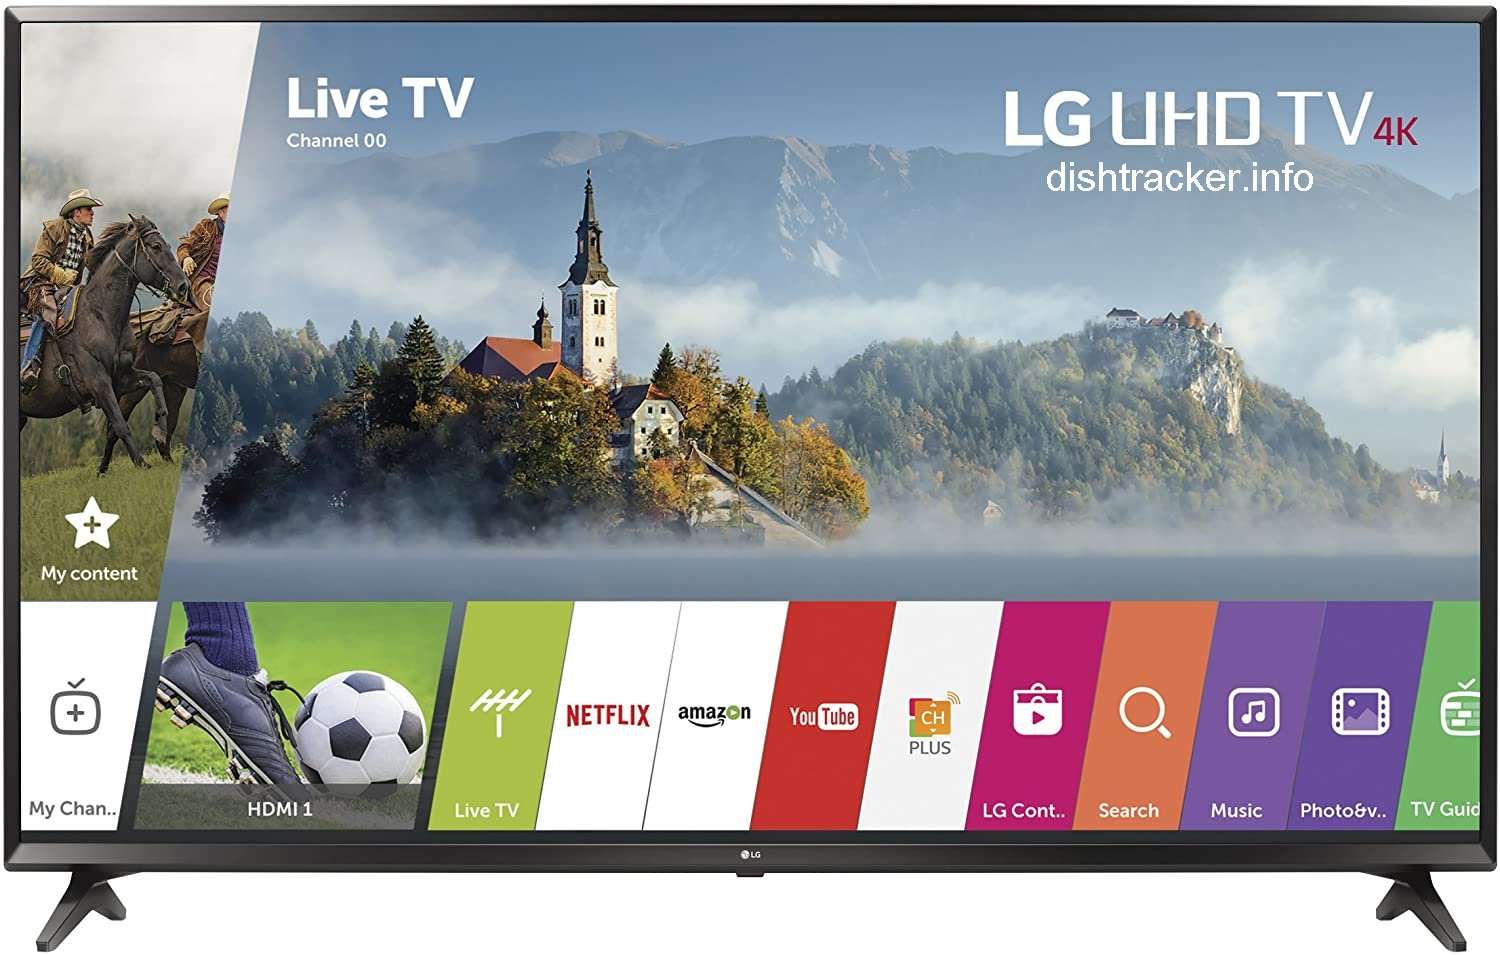 How to uninstall apps on LG Smart TV. Step by step guide